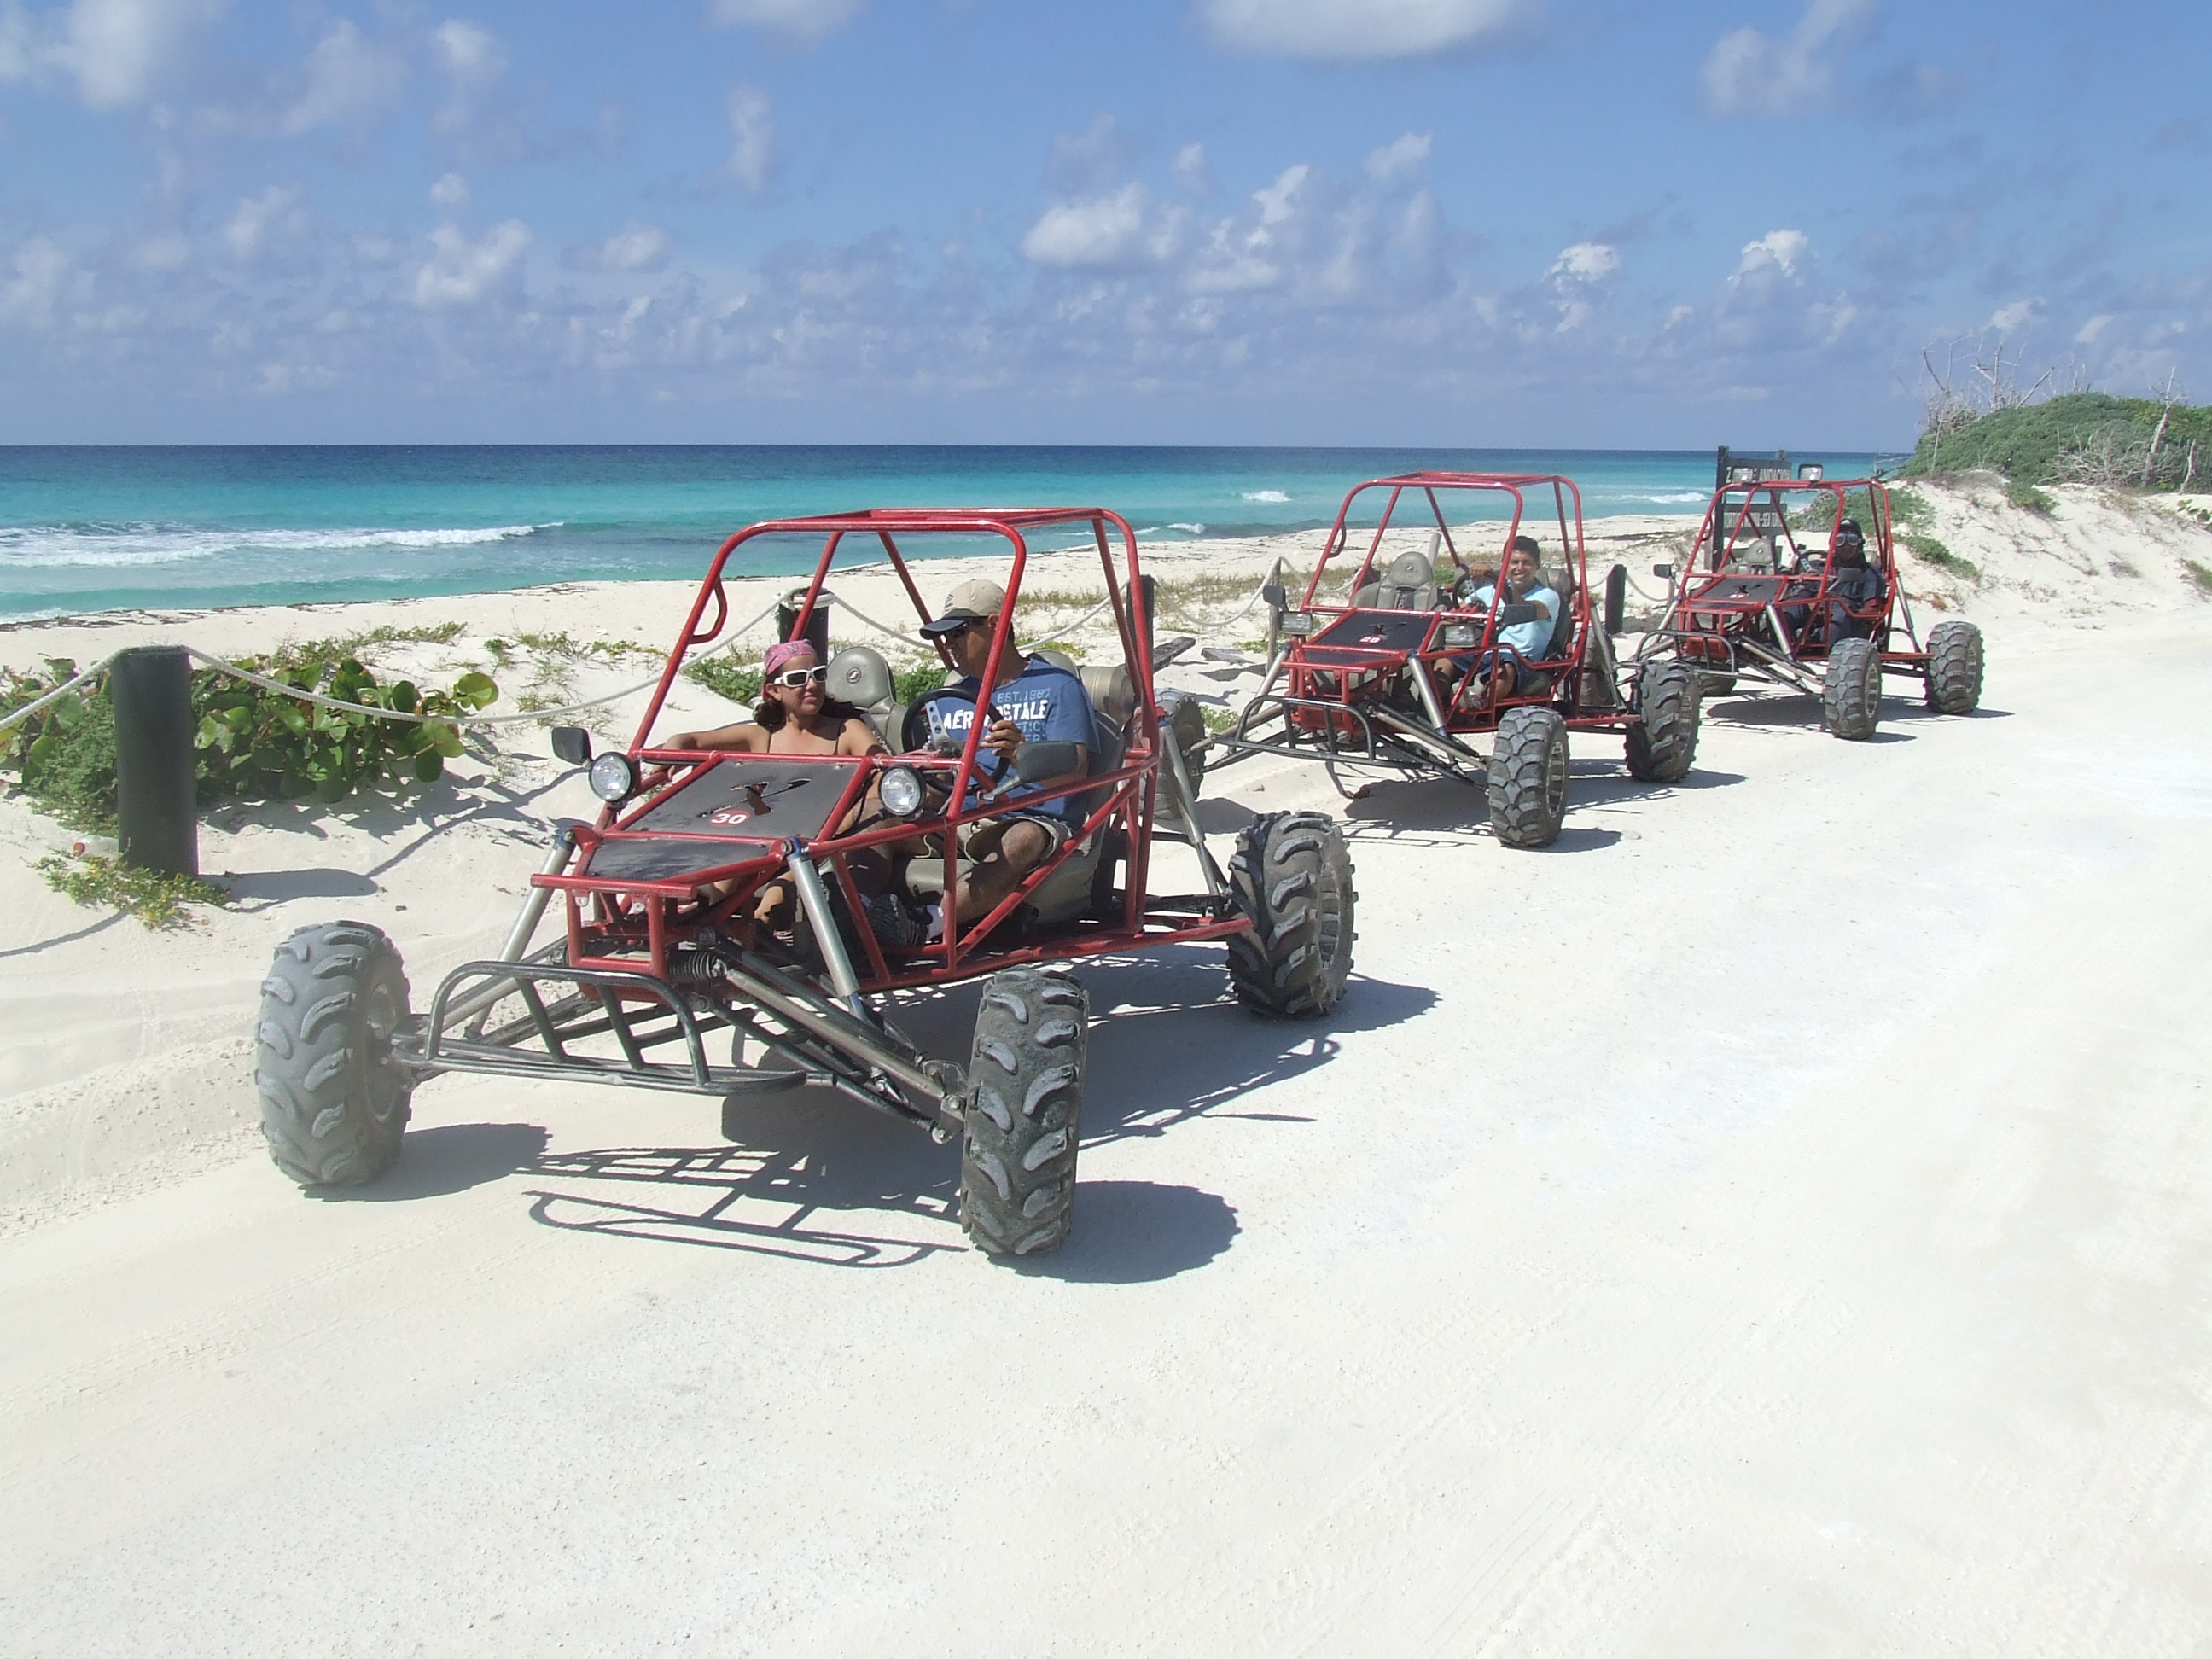 Adventurous Cozumel by Xrail Buggy